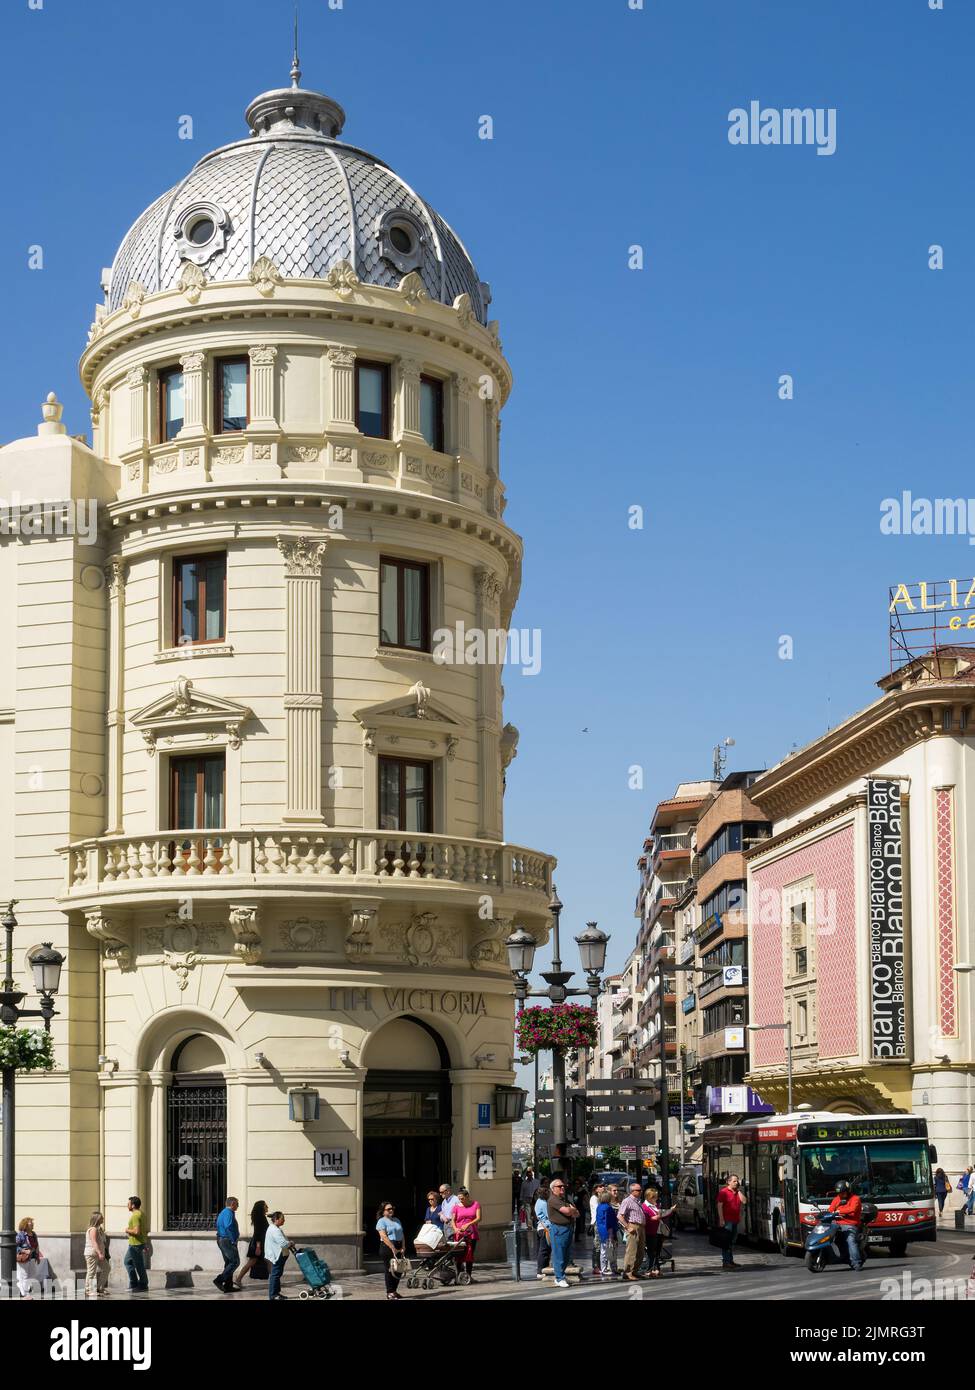 GRANADA, ANDALUCIA, SPAIN - MAY 7 : Victoria Hotel in Granada Spain on May 7, 2014. Unidentified people. Stock Photo